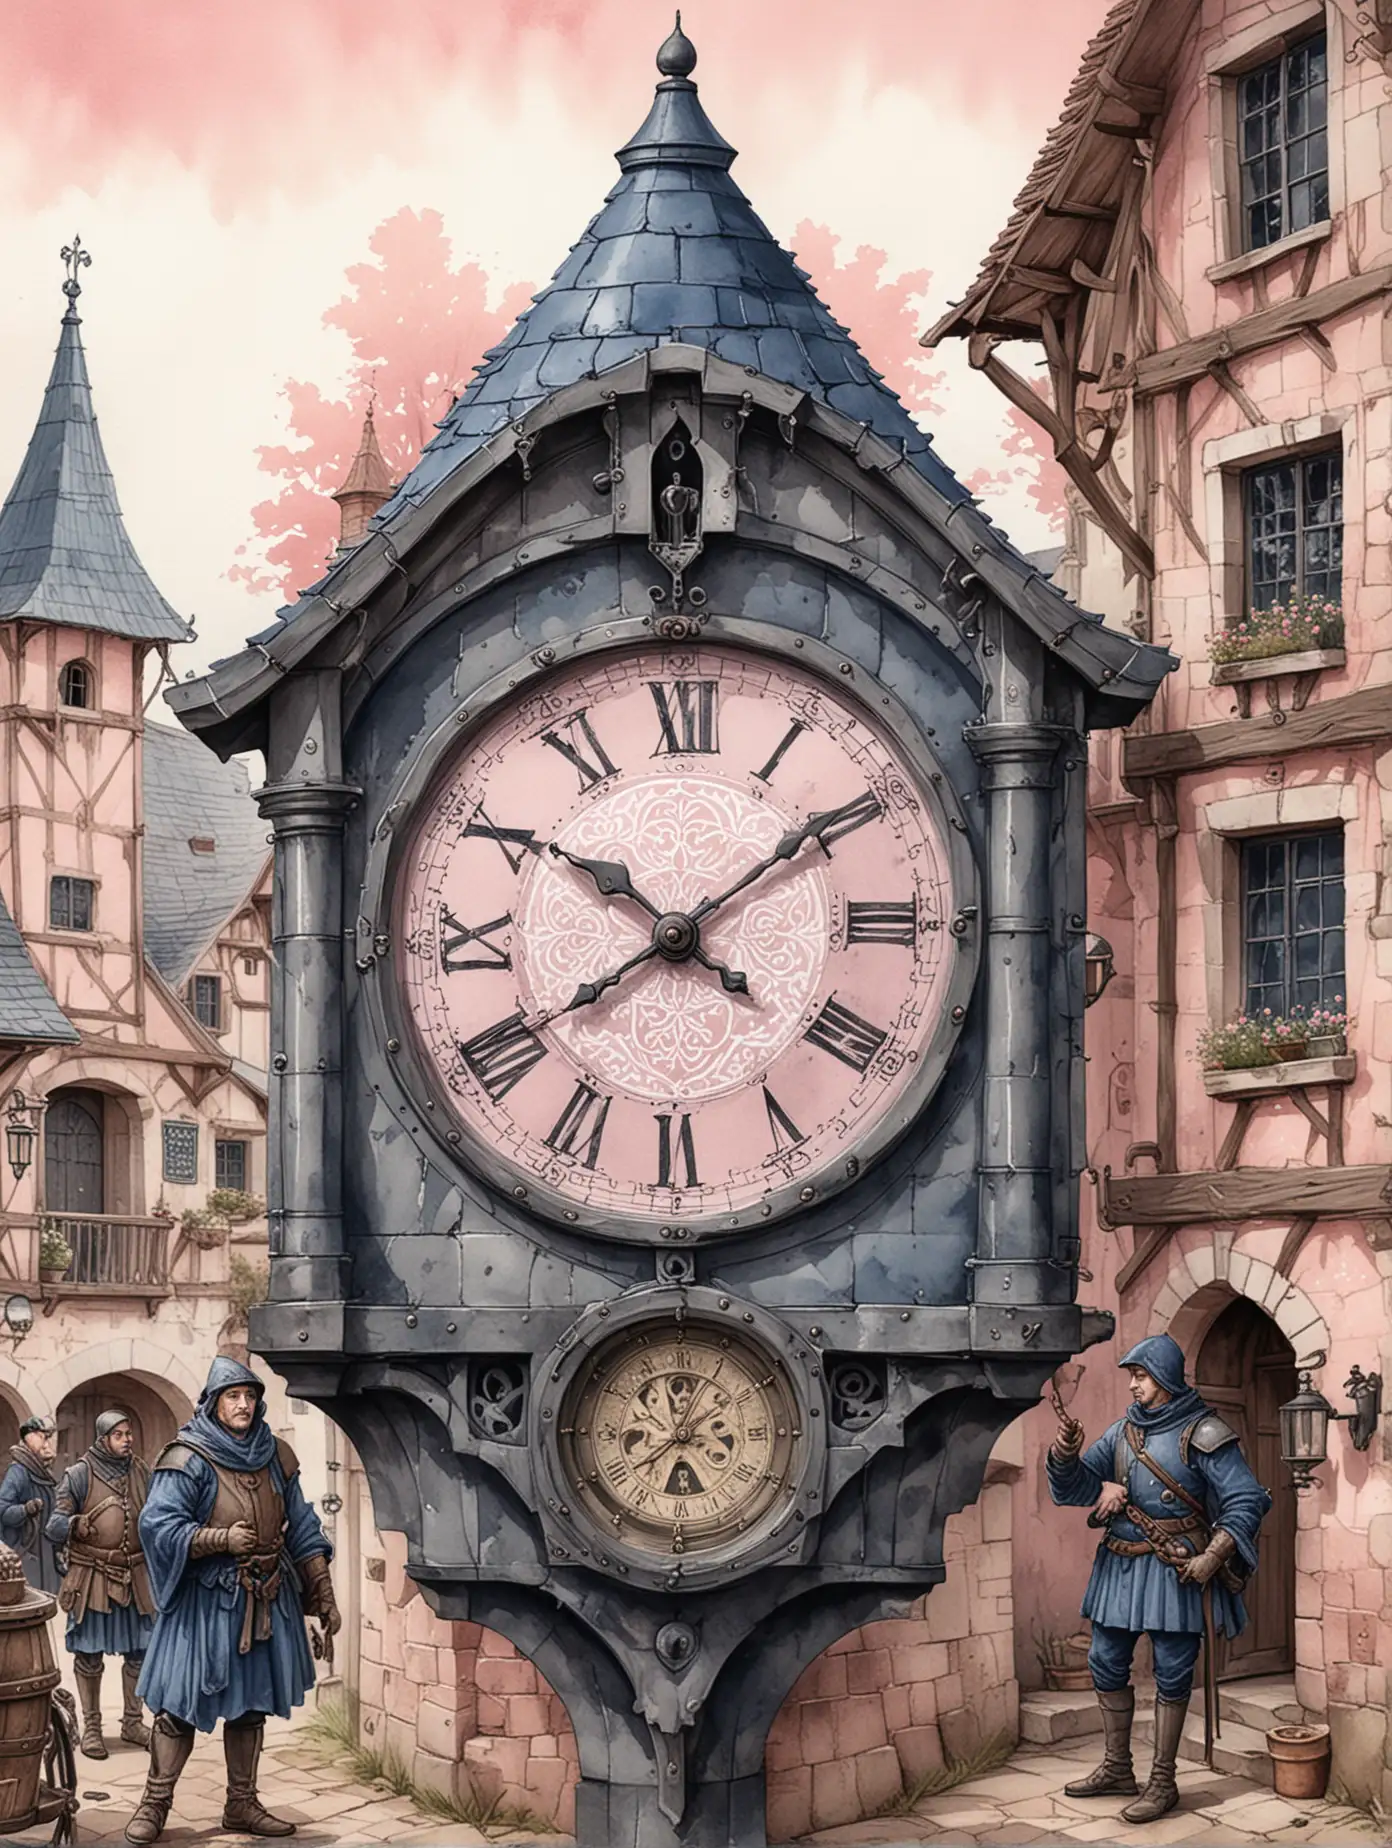 Medieval Steampunk Village with Clock Tower in Watercolor and Ink Wash